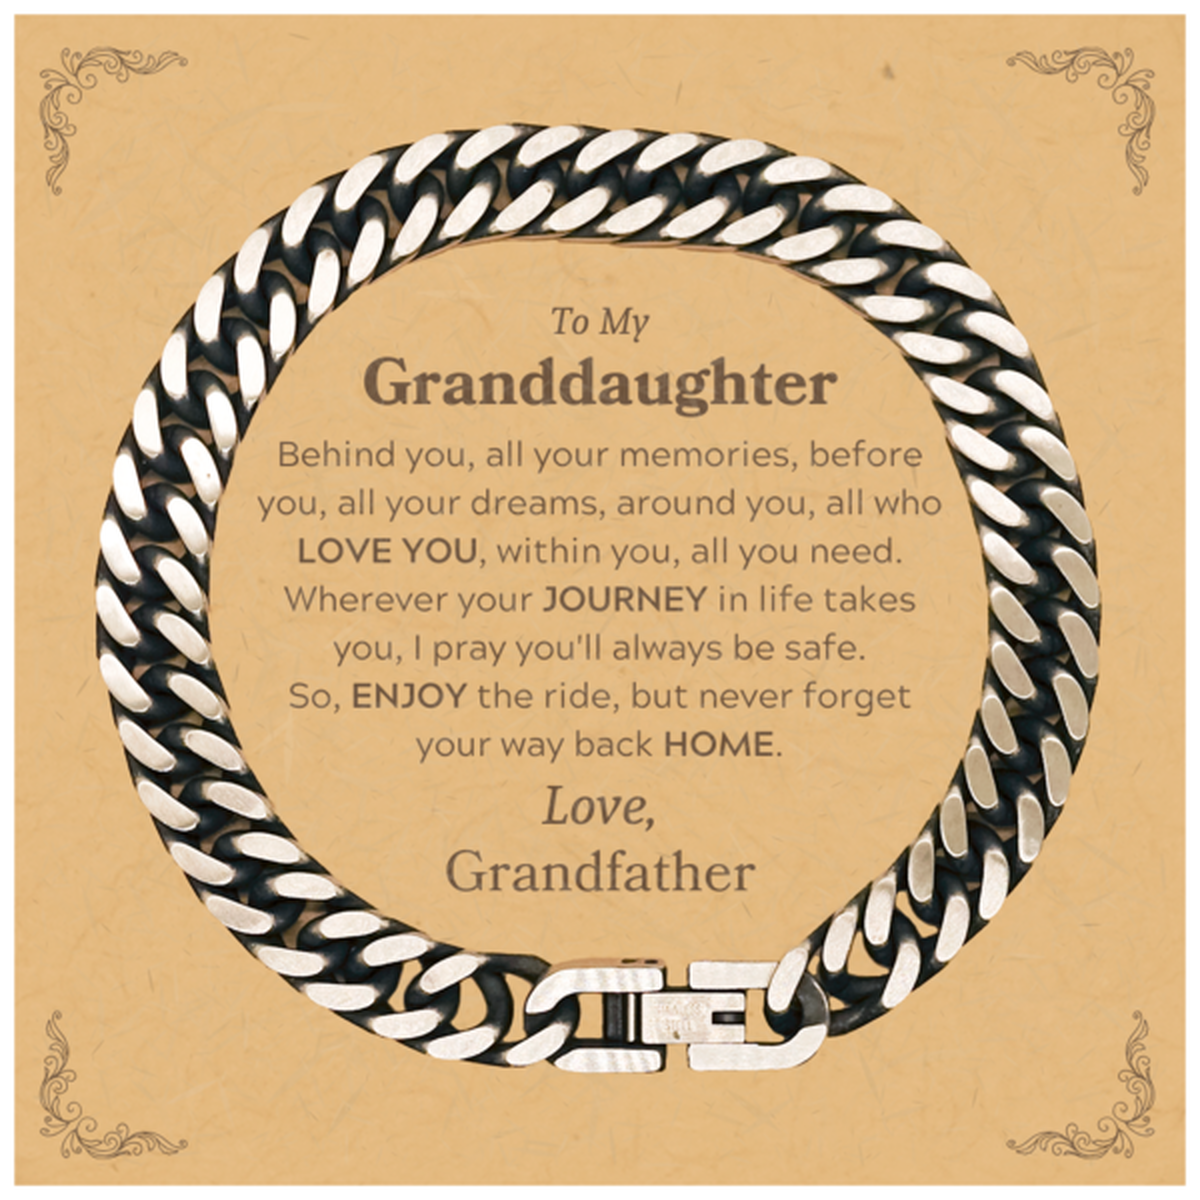 To My Granddaughter Graduation Gifts from Grandfather, Granddaughter Cuban Link Chain Bracelet Christmas Birthday Gifts for Granddaughter Behind you, all your memories, before you, all your dreams. Love, Grandfather